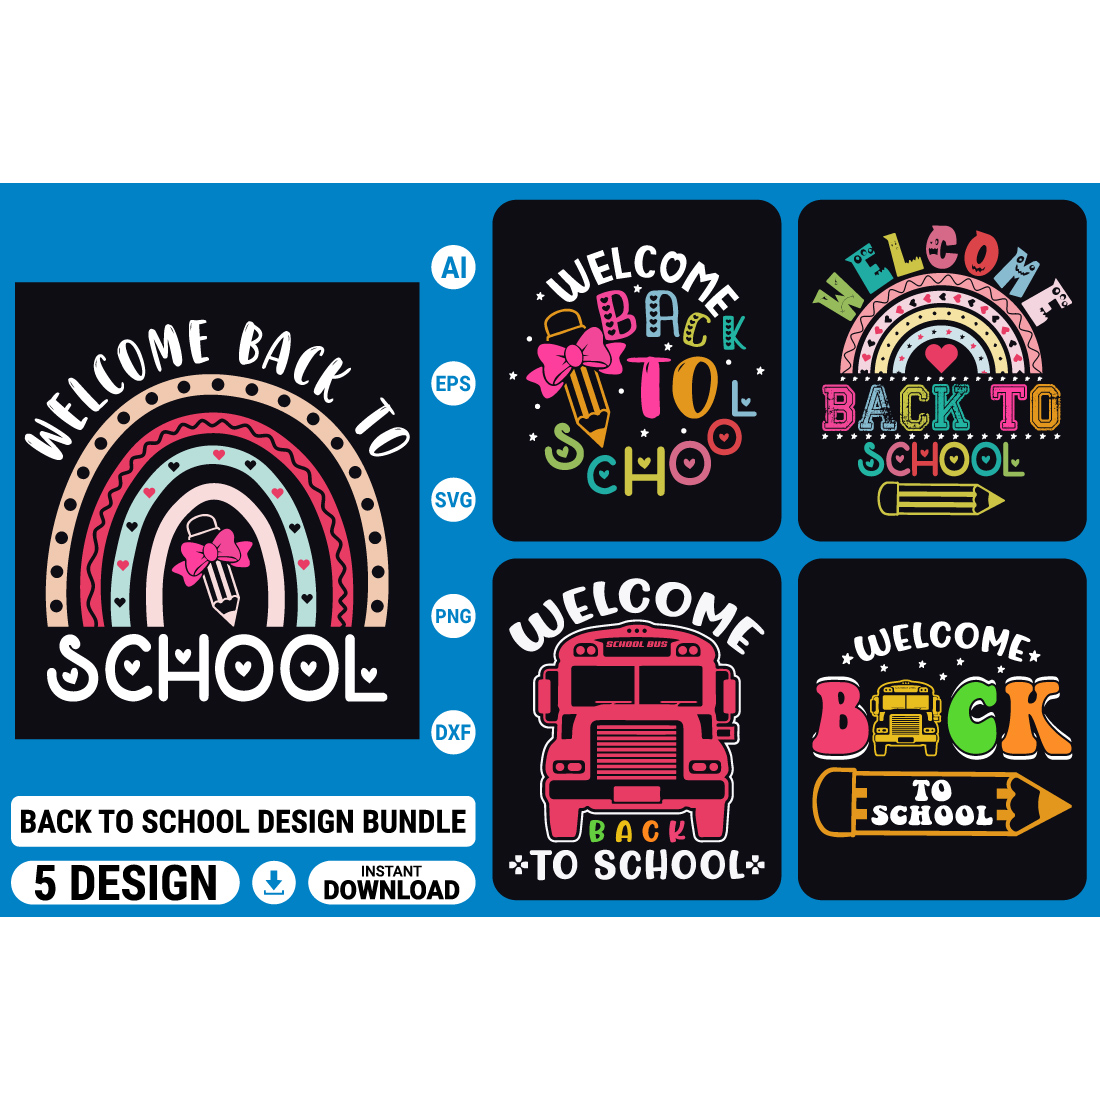 Back to school t-shirt design bundle, first day, hundred days of school, typography t-shirts cover image.